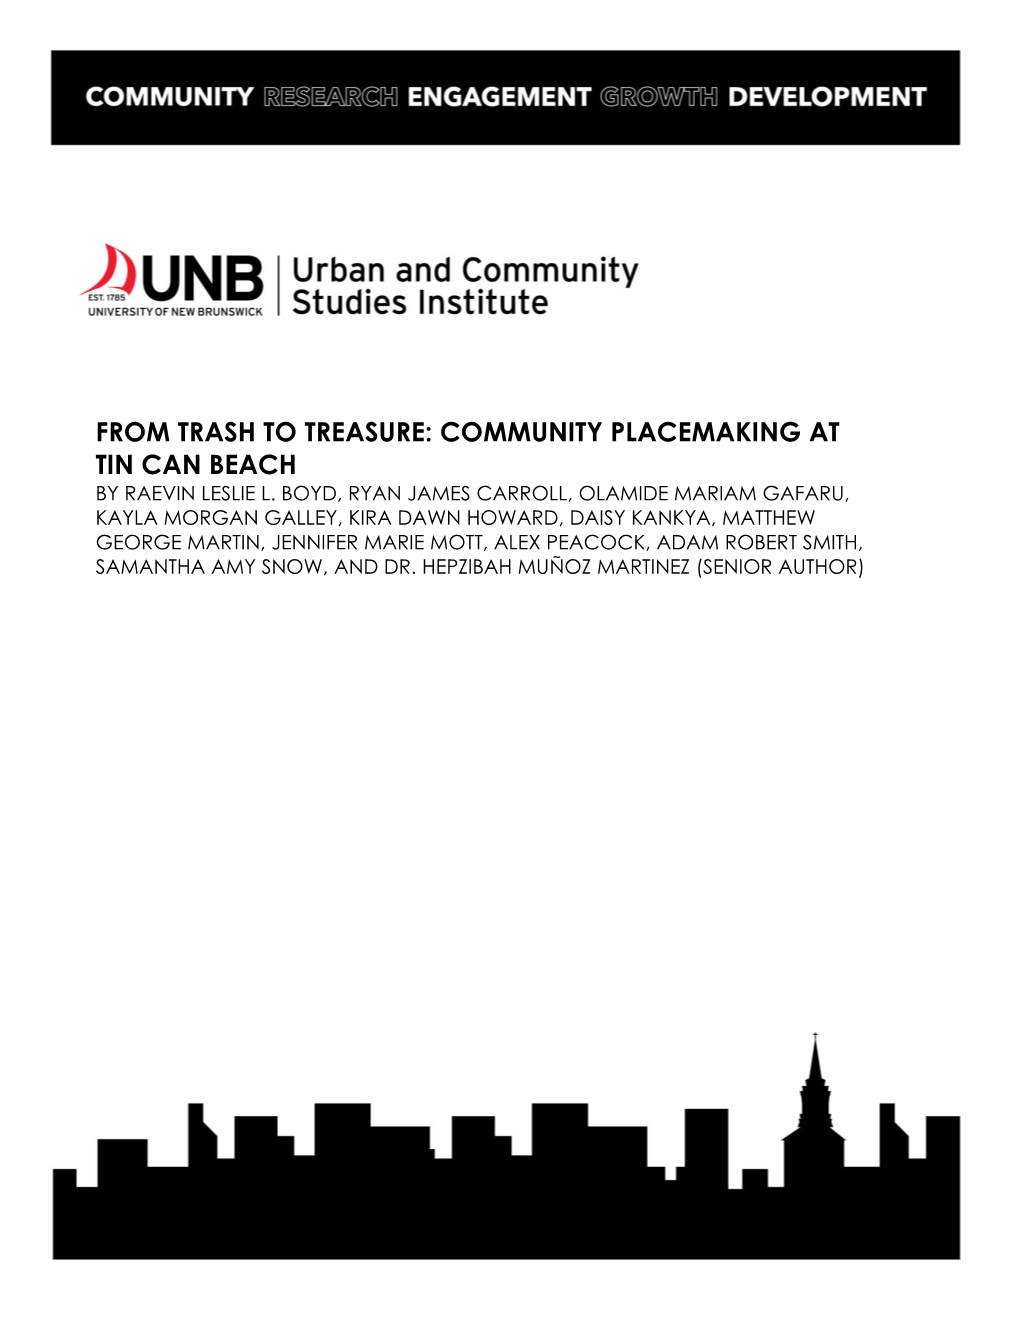 Community Placemaking at Tin Can Beach by Raevin Leslie L